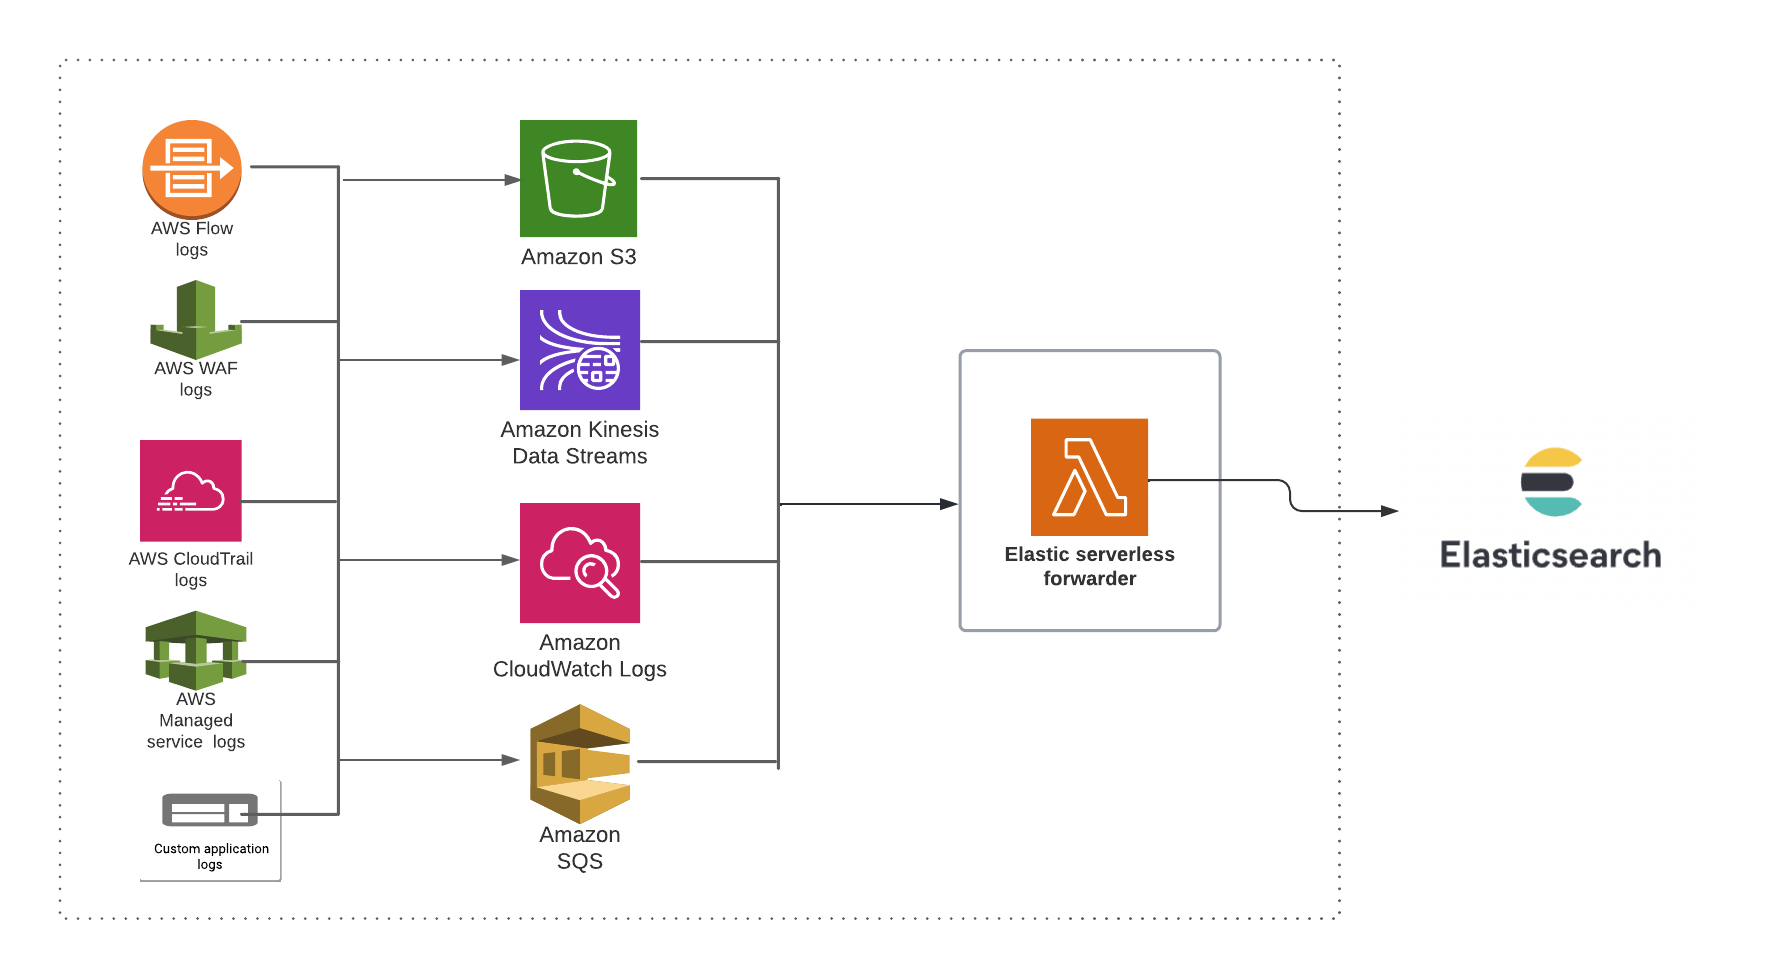 Elastic Serverless Forwarder is a Lambda application published in AWS Serverless Application Repository (SAR) that enables Elastic users to collect logs from AWS services in a serverless fashion.